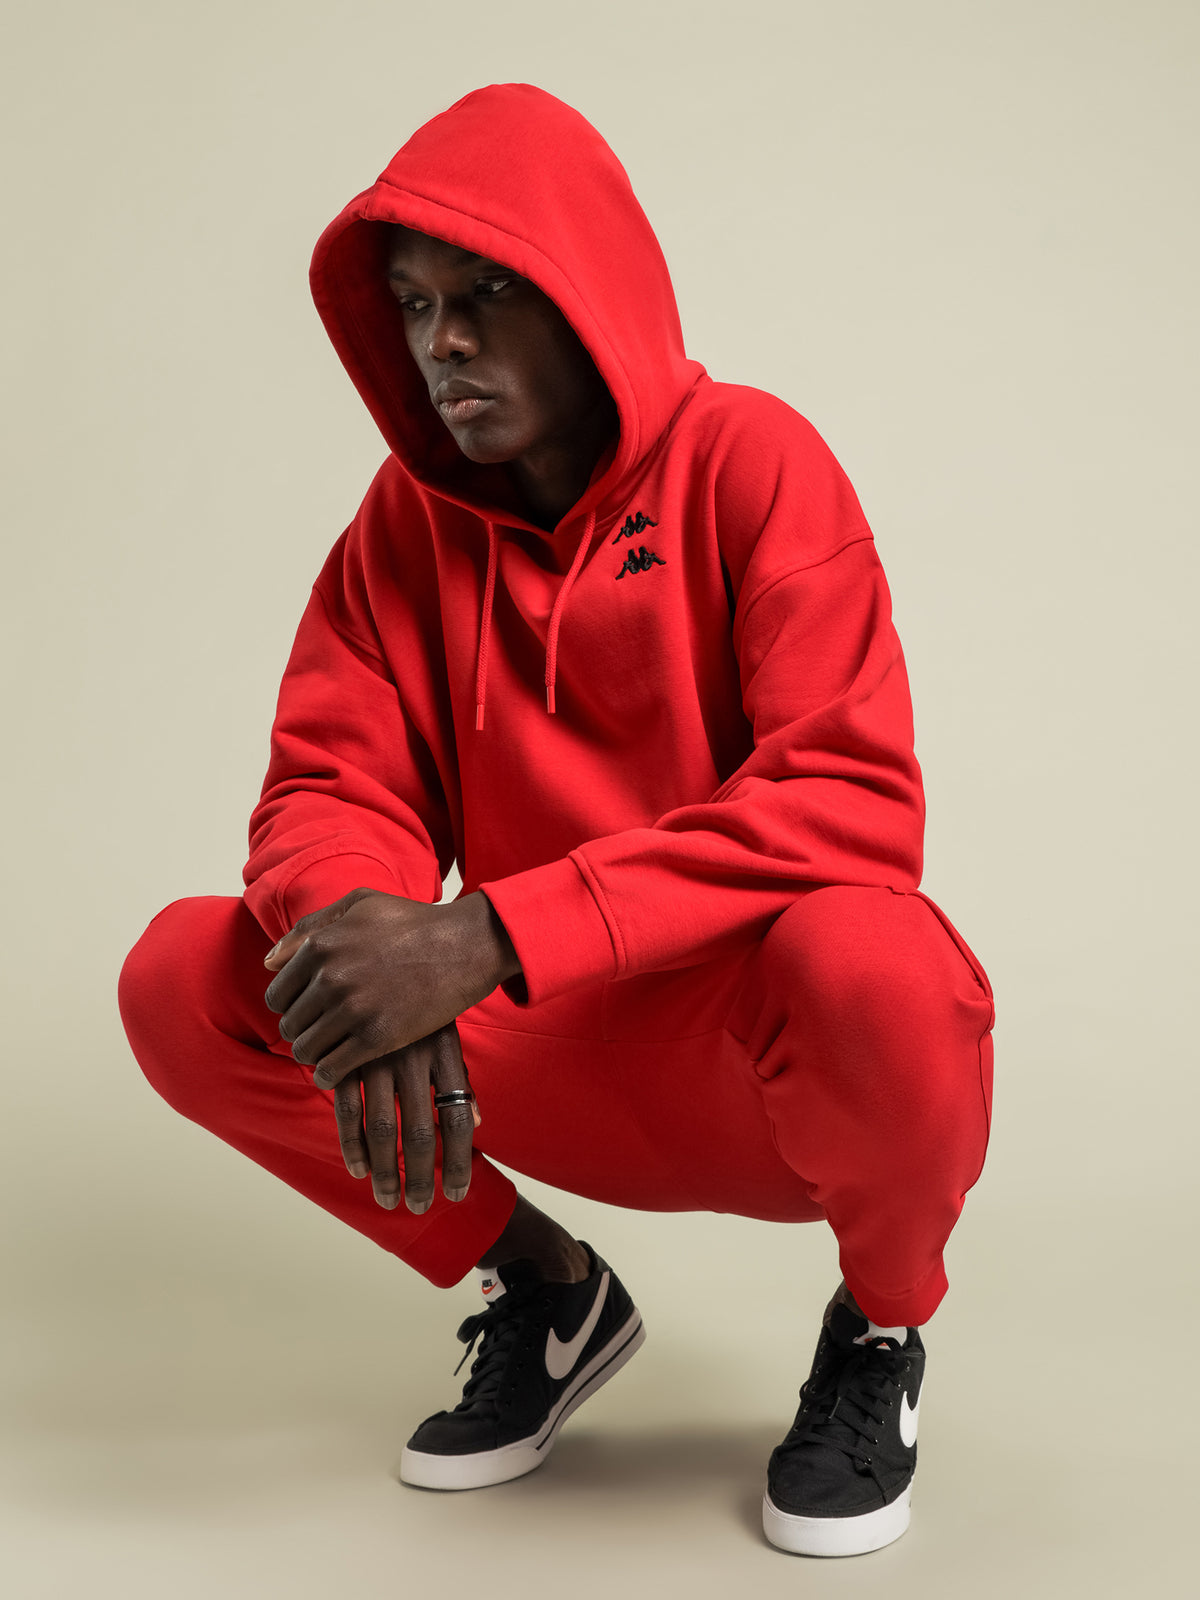 Authentic Diran Hoodie in Red